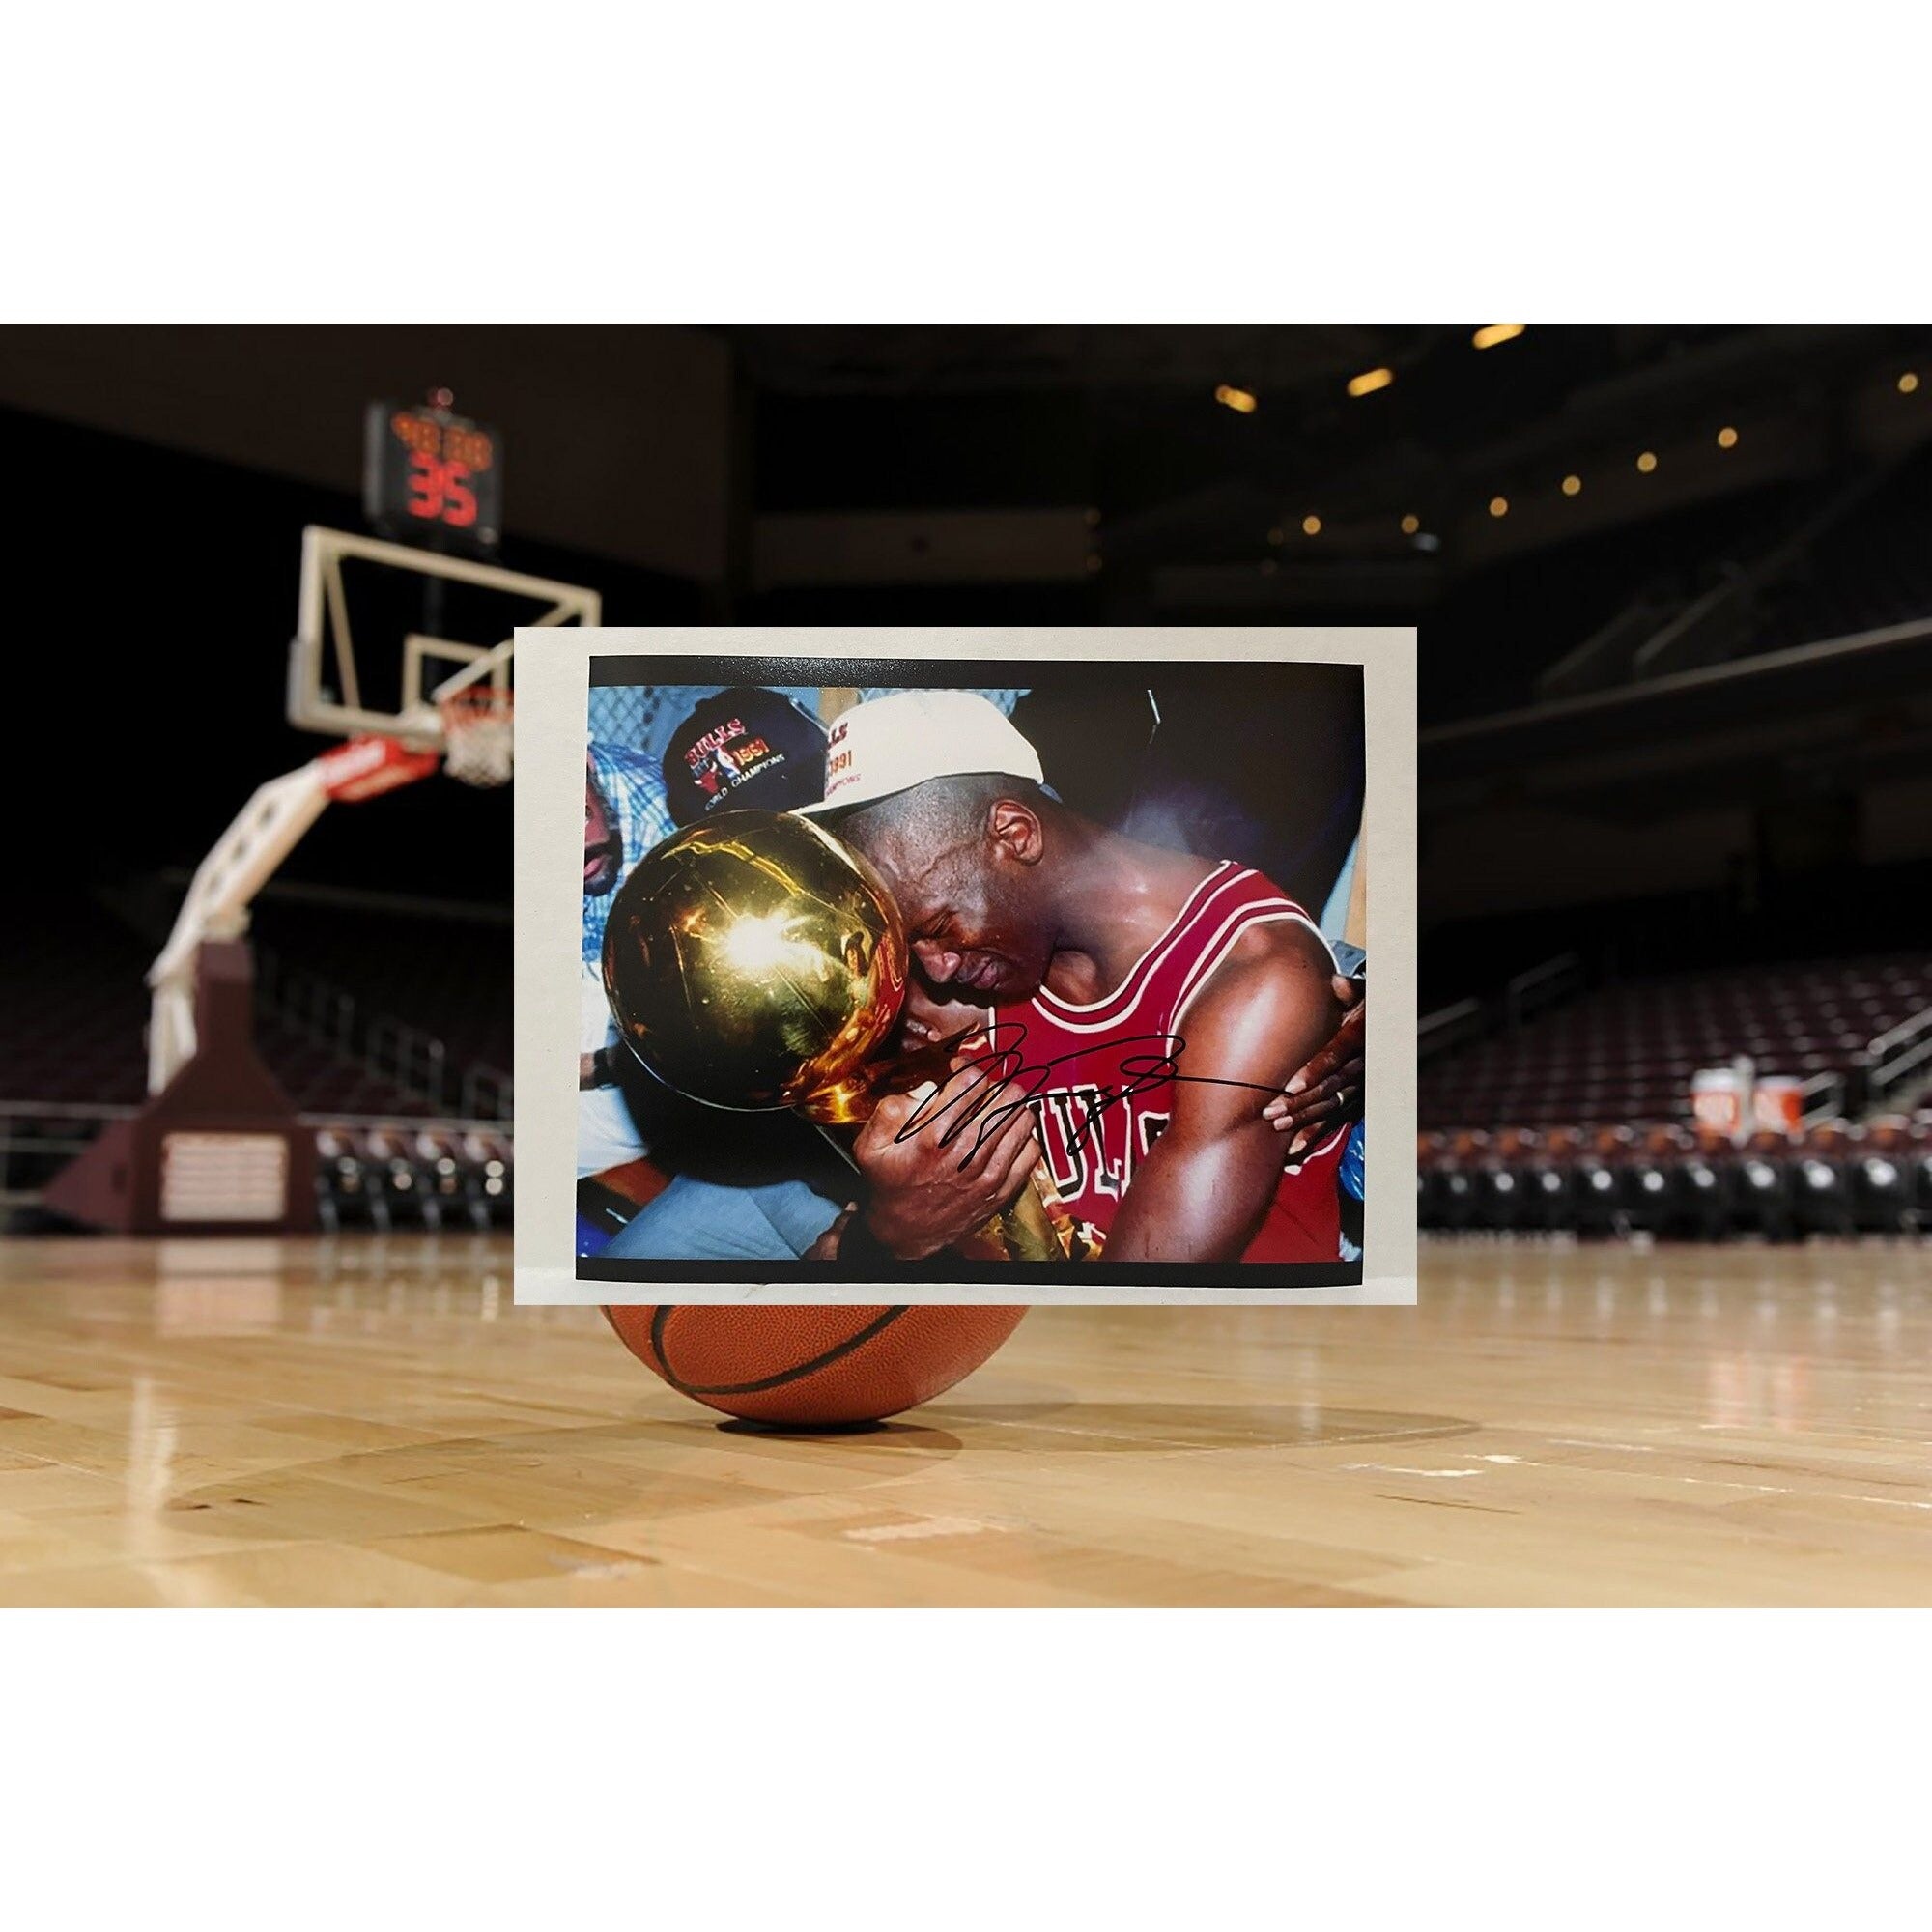 Michael Jordan 8x10 signed with proof